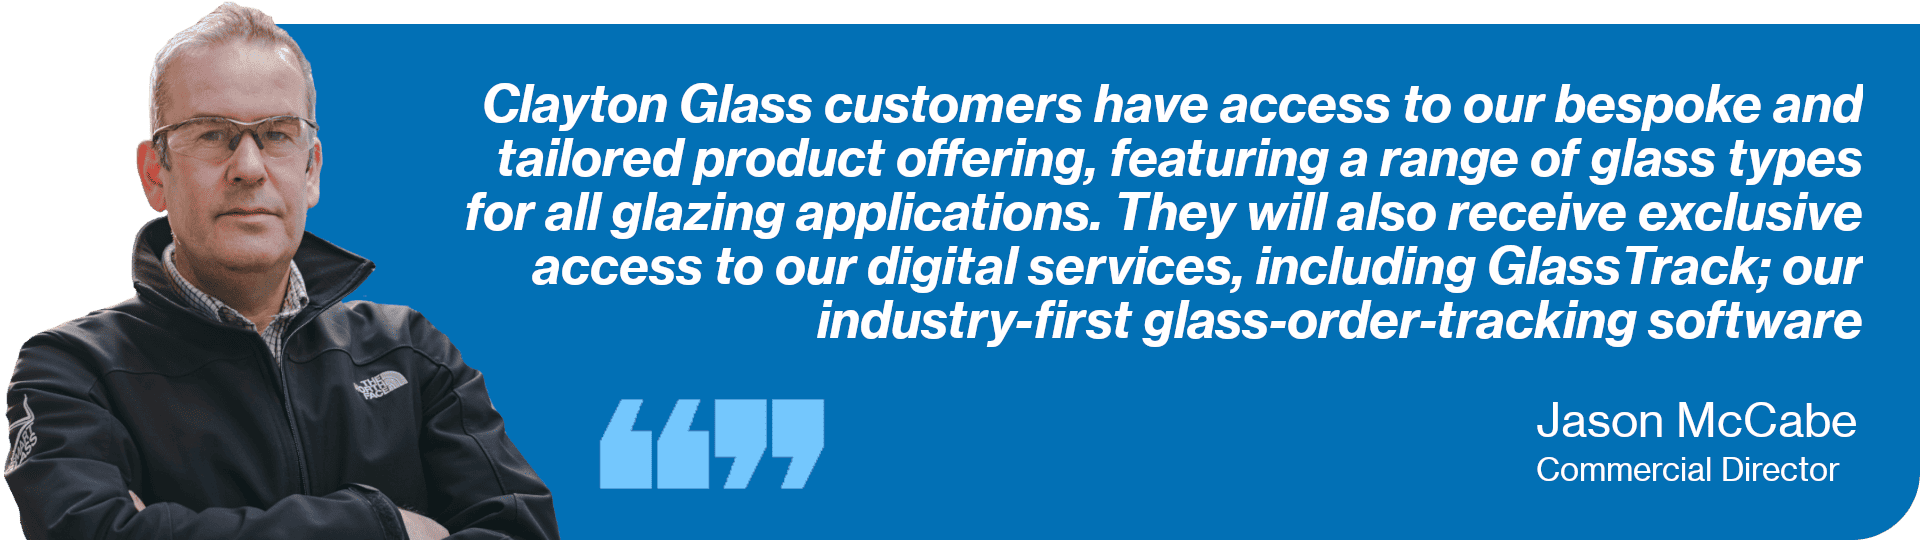 A quote from Commercial Director, Jason McCabe, reading: Clayton Glass customers have access to our bespoke and tailored product offering, featuring a range of glass types for all glazing applications. They will also receive exclusive access to our digital services, including GlassTrack; our industry-first glass-order-tracking software.